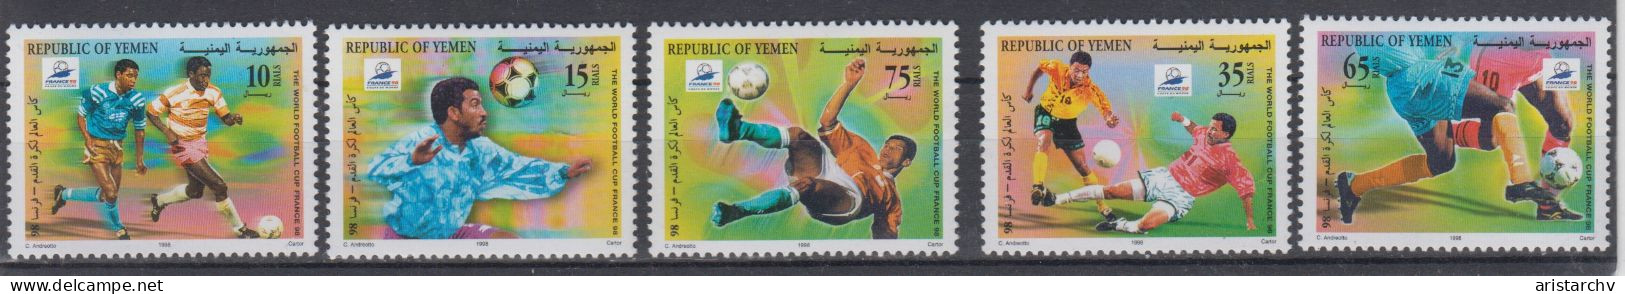 YEMEN 1998 FOOTBALL WORLD CUP SHEETLET AND 5 STAMPS - 1998 – Francia